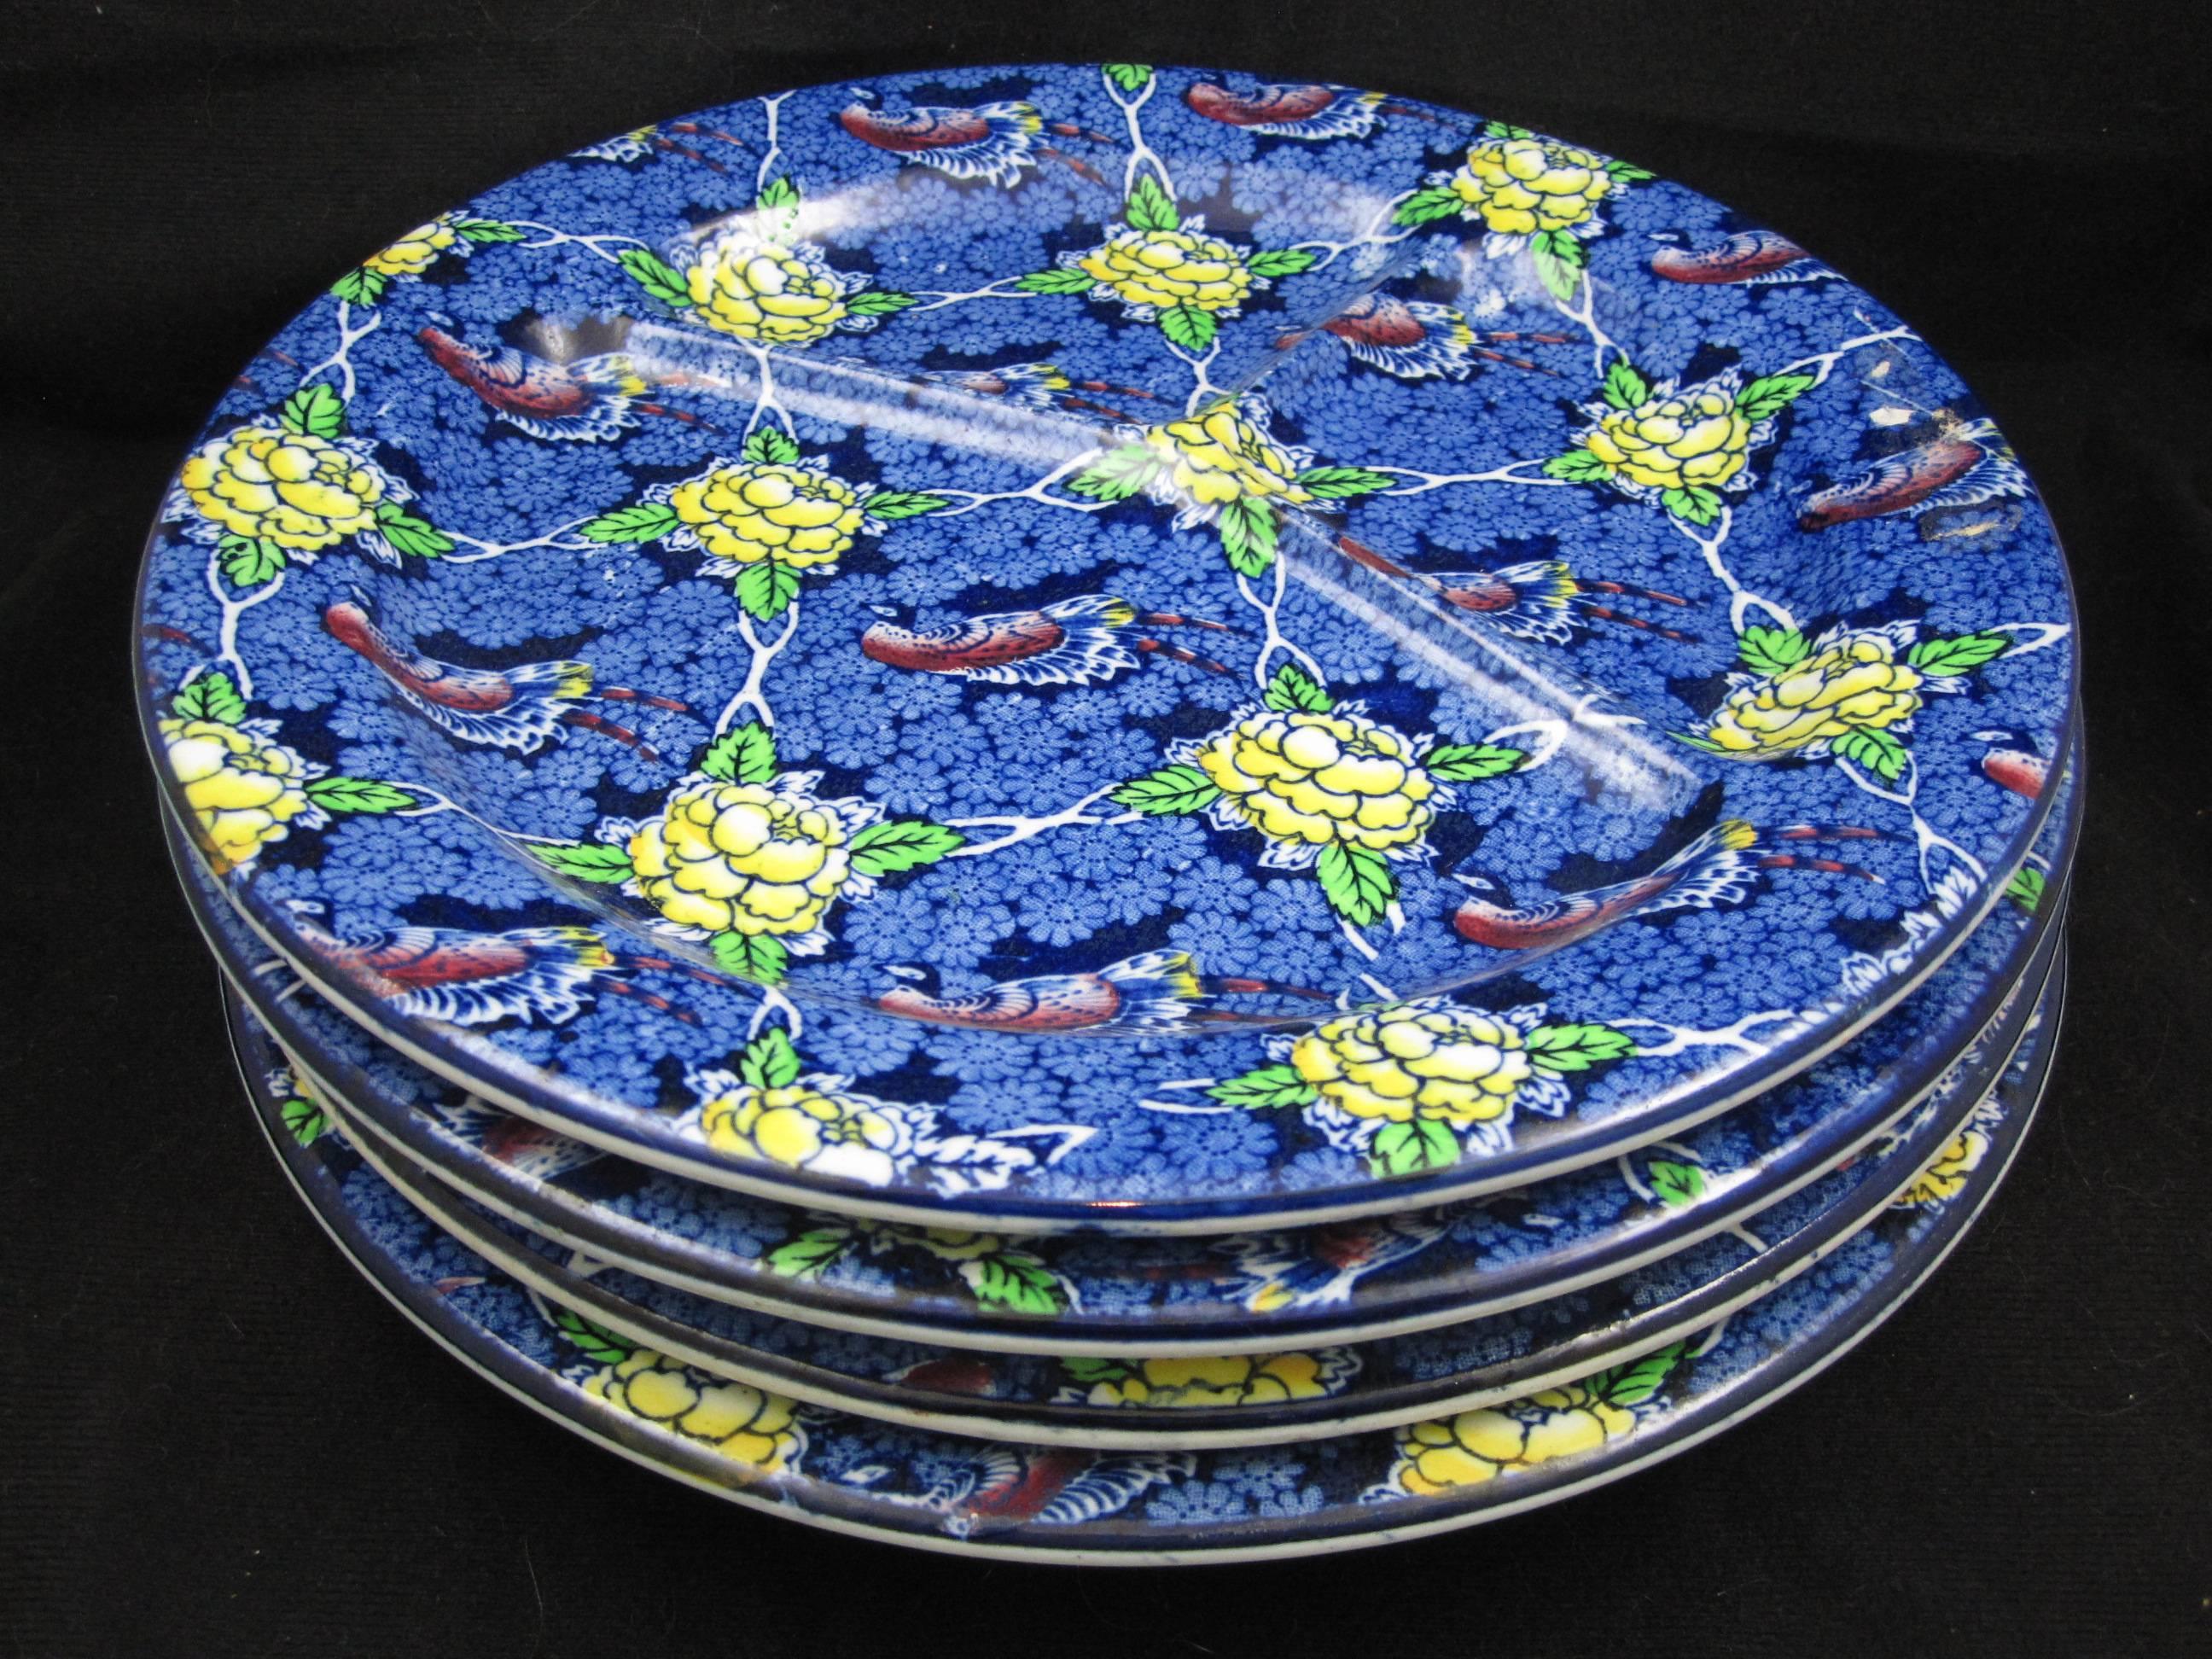 A set of four Staffordshire ironstone chop grill plates produced by Brown & Steventon, Burslem, England, circa 1910. An overall chintz sheet pattern transfer of birds against a lattice of yellow flowers on a cobalt blue floral ground. The heavy